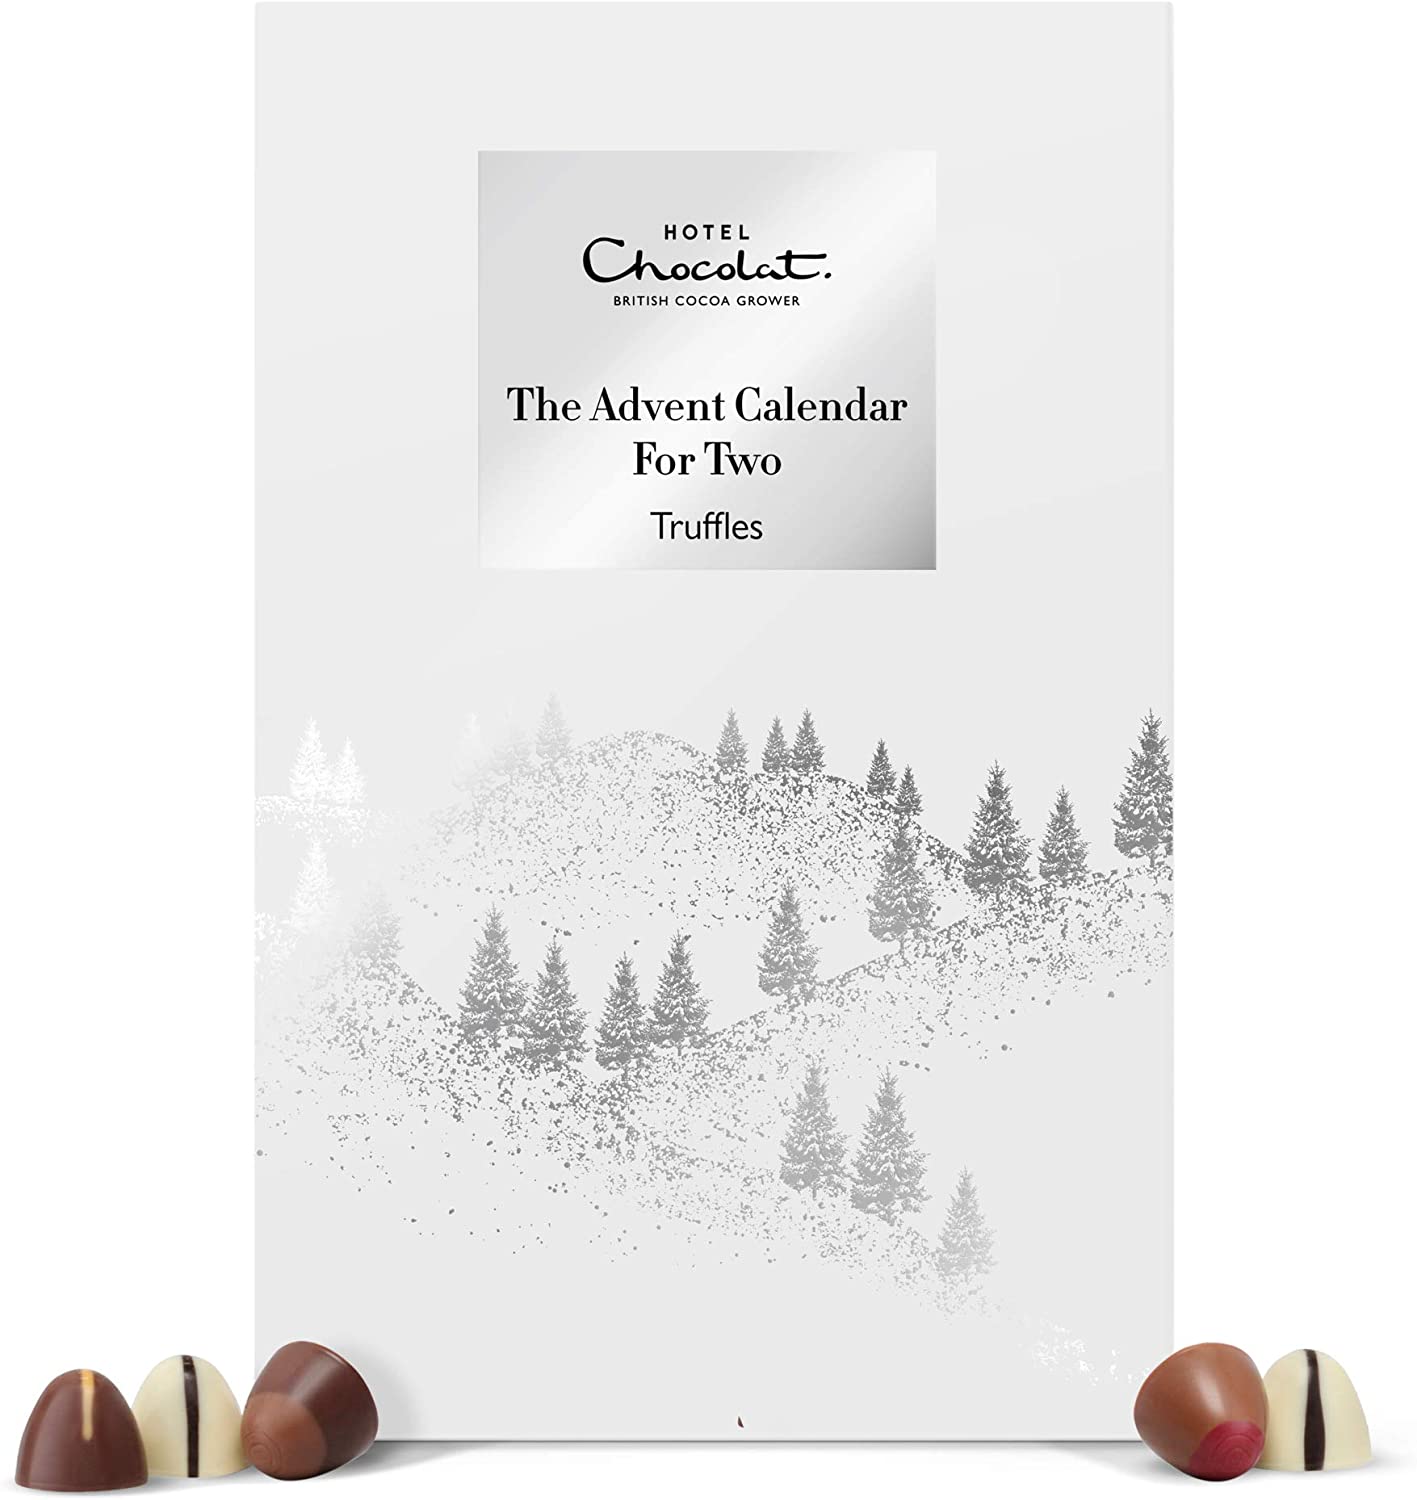 Hotel Chocolat The Advent Calendar For Two